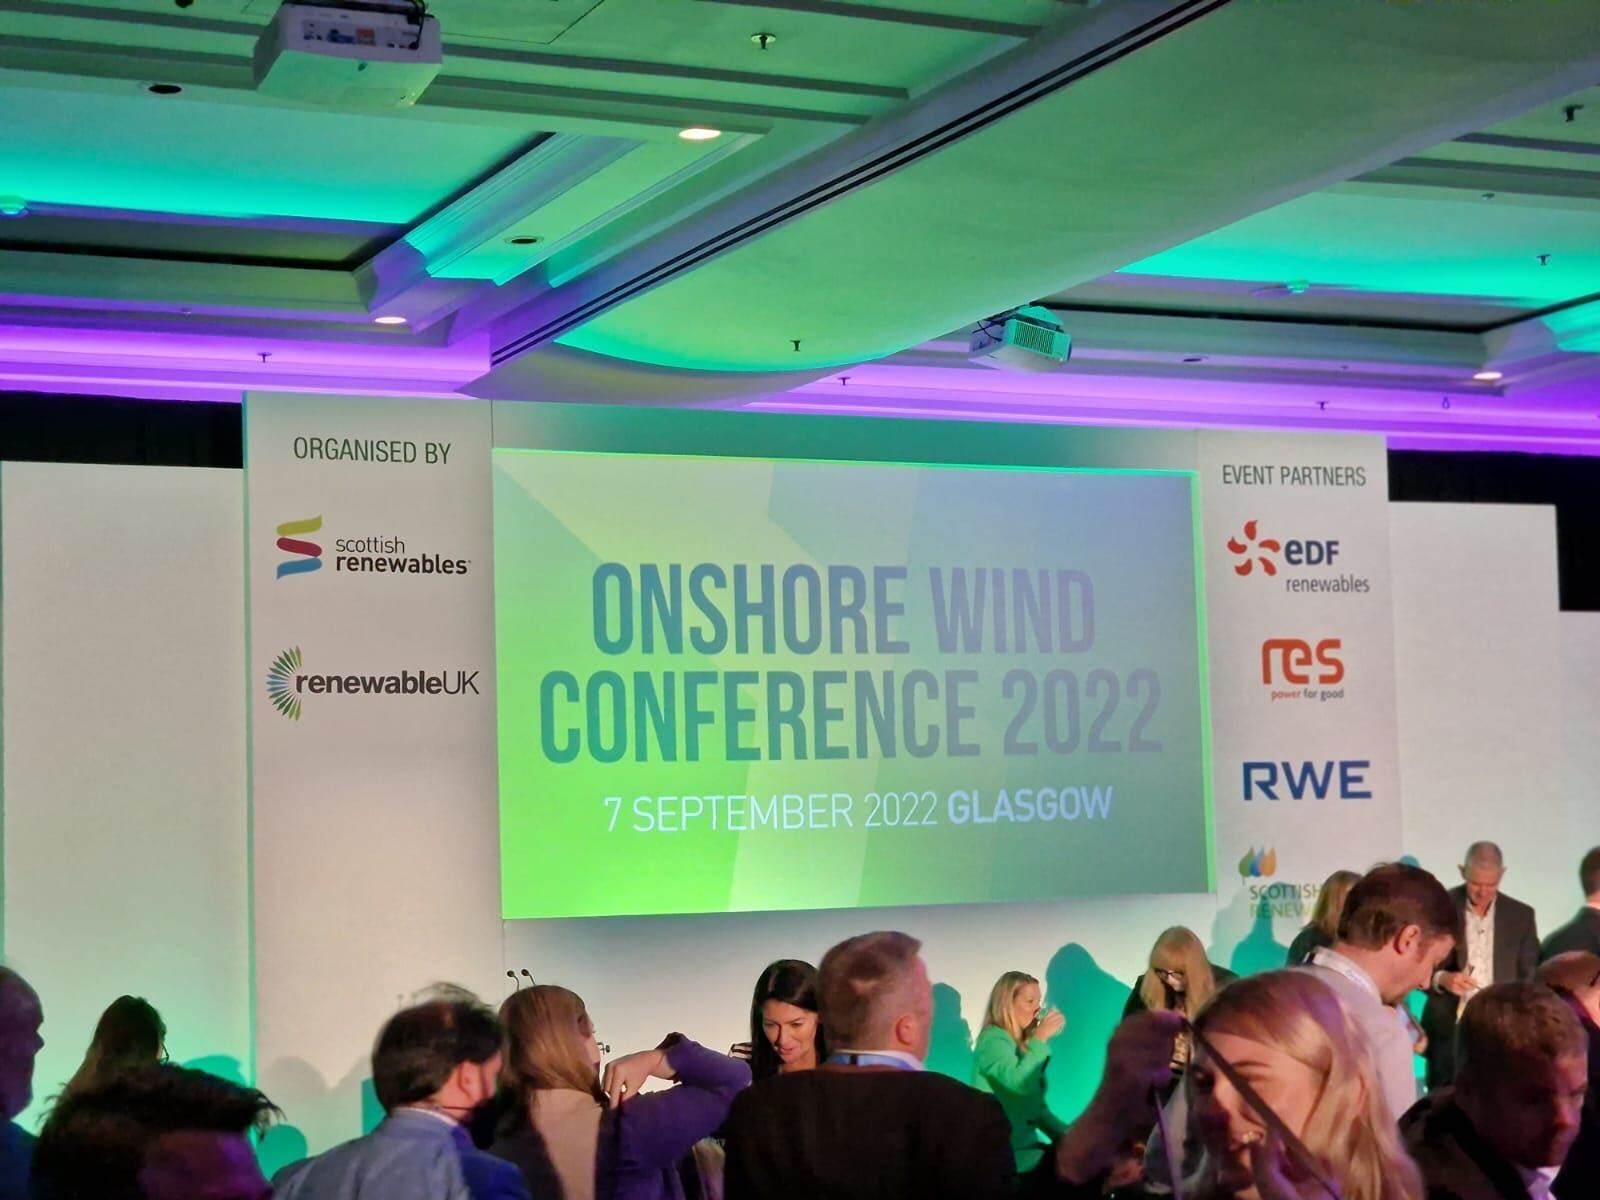 This is an image of the Onshore Wind Conference.